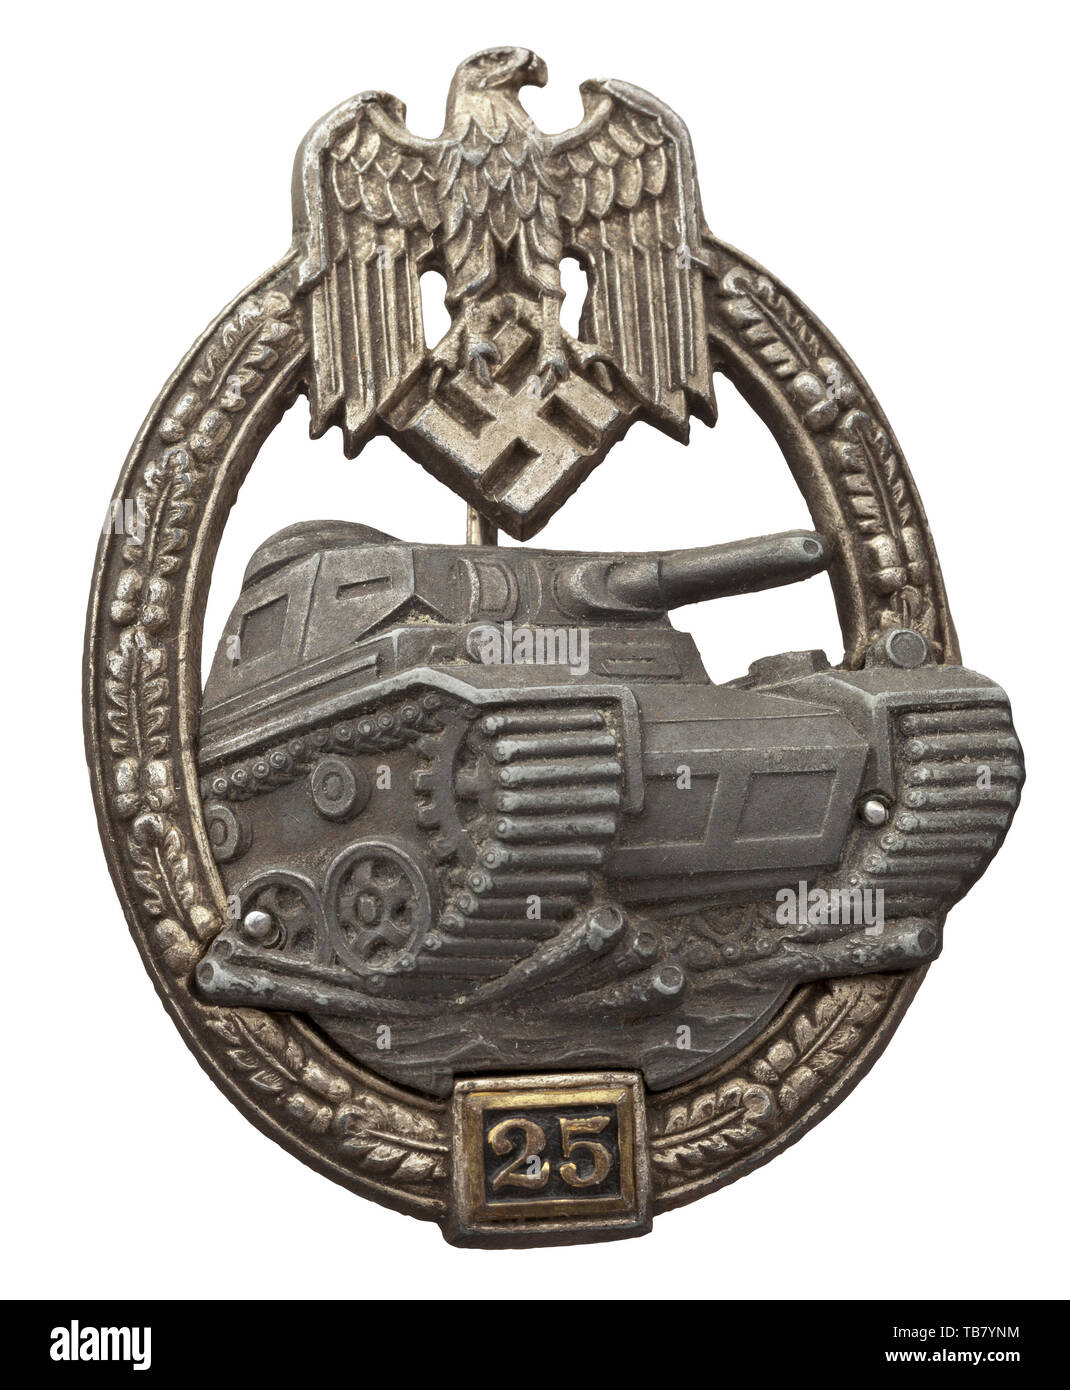 A Tank Battle Badge in Silver, 2nd Grade for 25 engagement days - Juncker production, Half-hollow silvered zinc example of the 2nd type with riveted aluminium tank appliqué on a thin non-magnetic attachment pin, the pin and clasp of magnetic flat wire, the little soldered number plate of gilt and lacquered iron. Rivet hole for the first type (tombak rivet) present, but unused. A beautiful early example of the 2nd type by the C.E. Juncker firm in Berlin. Width 47 mm. Weight 32.8 g. historic, historical 20th century, Editorial-Use-Only Stock Photo